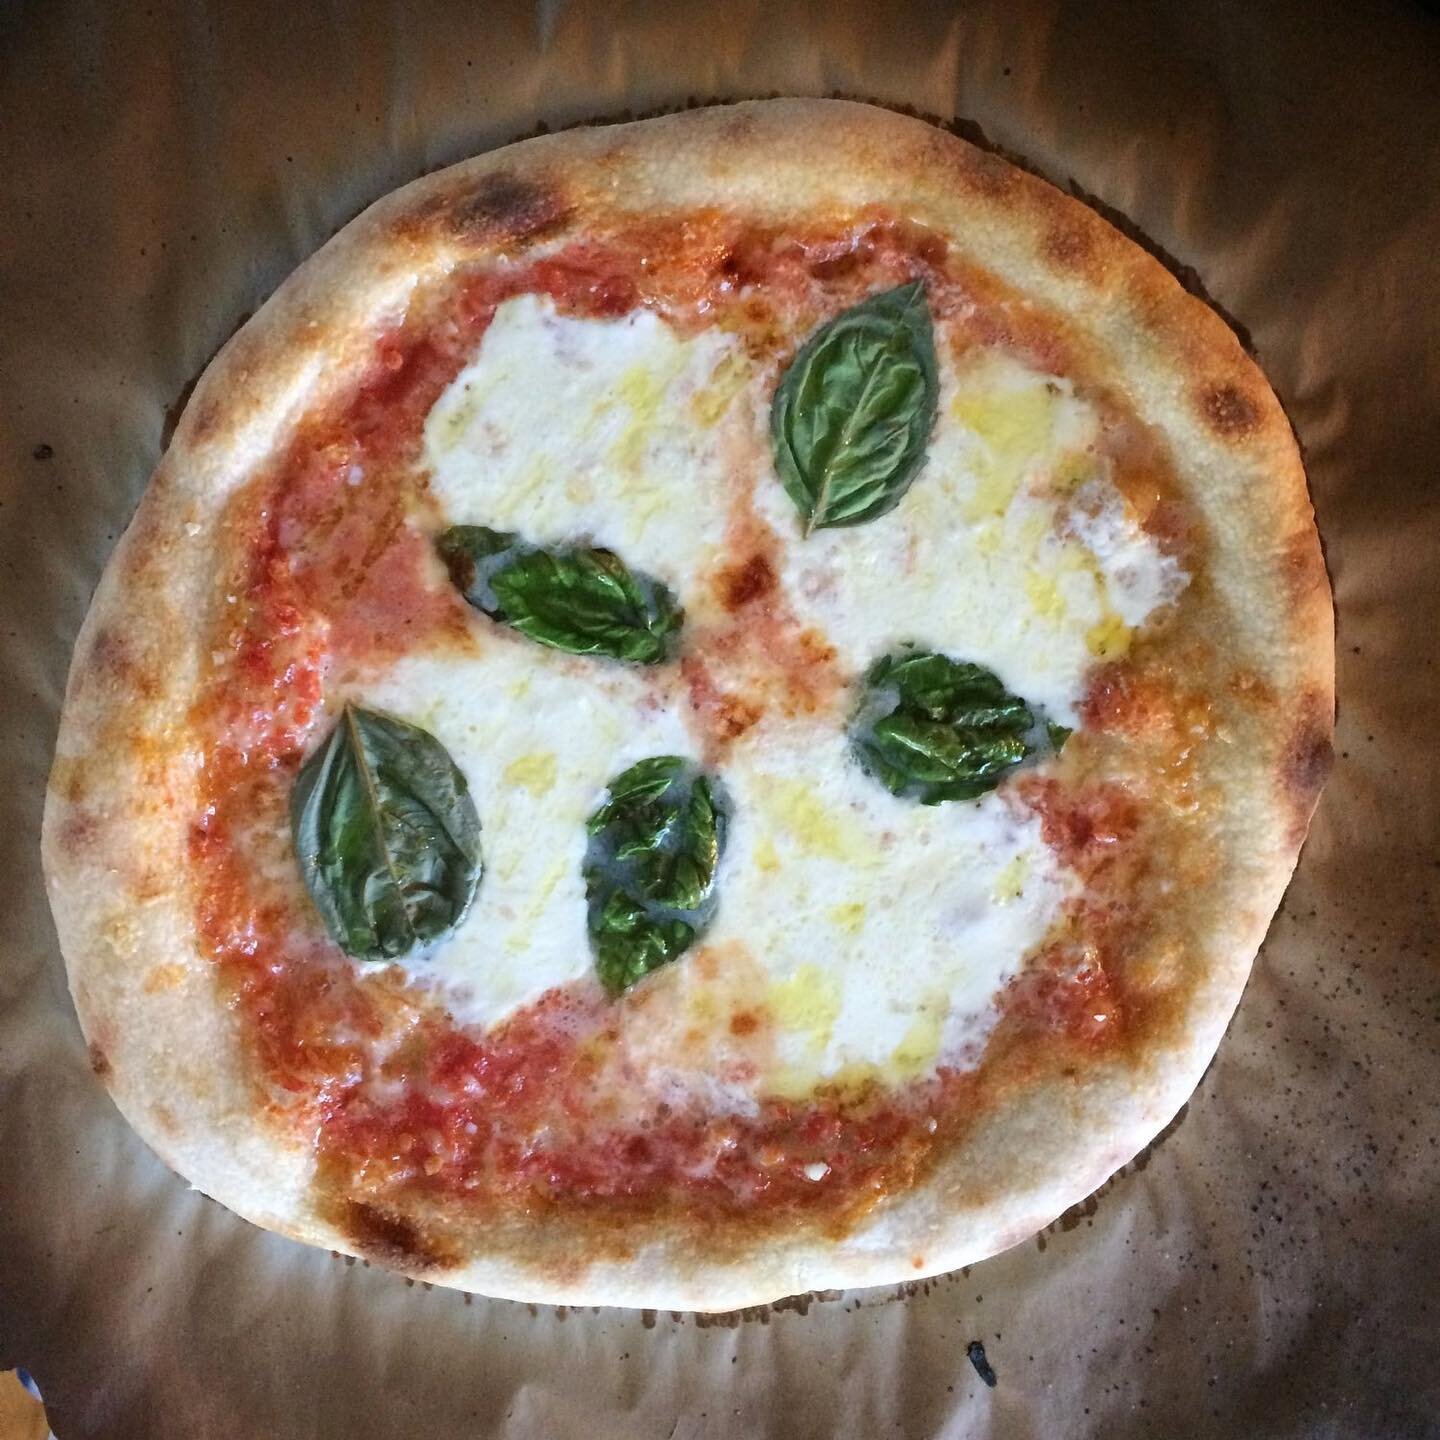 New recipe for sourdough pizza dough is up on #jennyblogs!

Take your homemade pizzas to the next level with sourdough pizza!
This recipe from Ken Forkish is simple enough for sourdough beginners and good enough it will have you making it over and ov